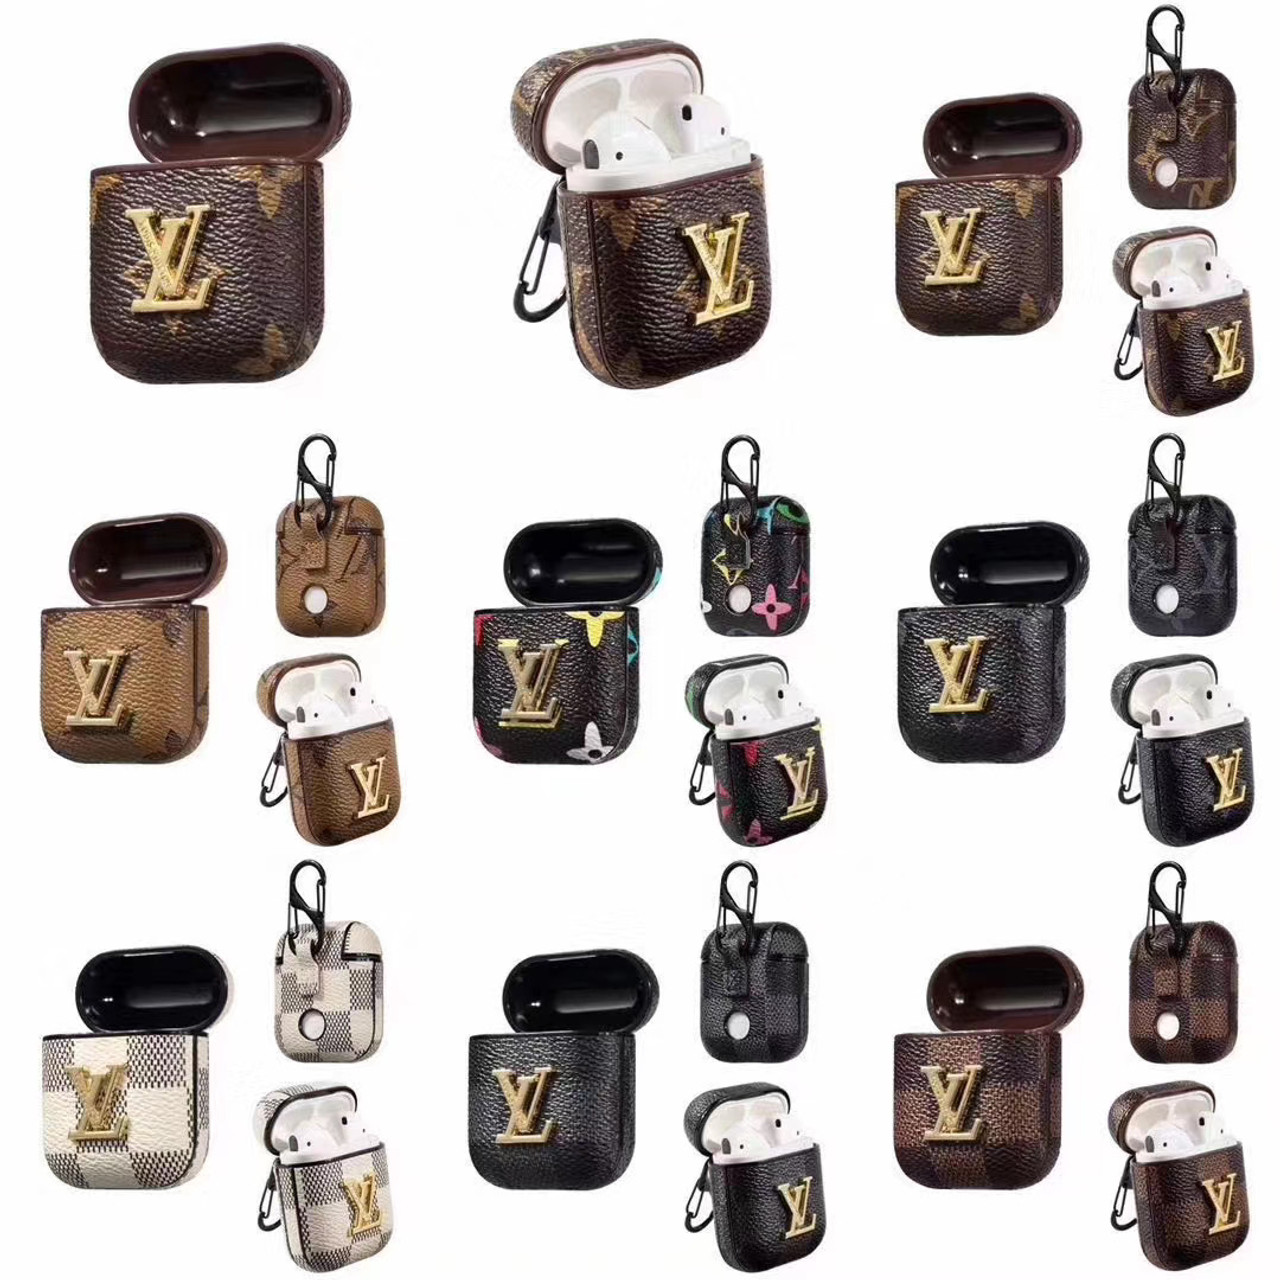 Louis Vuitton Protection Case For Apple Airpods Pro Airpods 1 2 -5